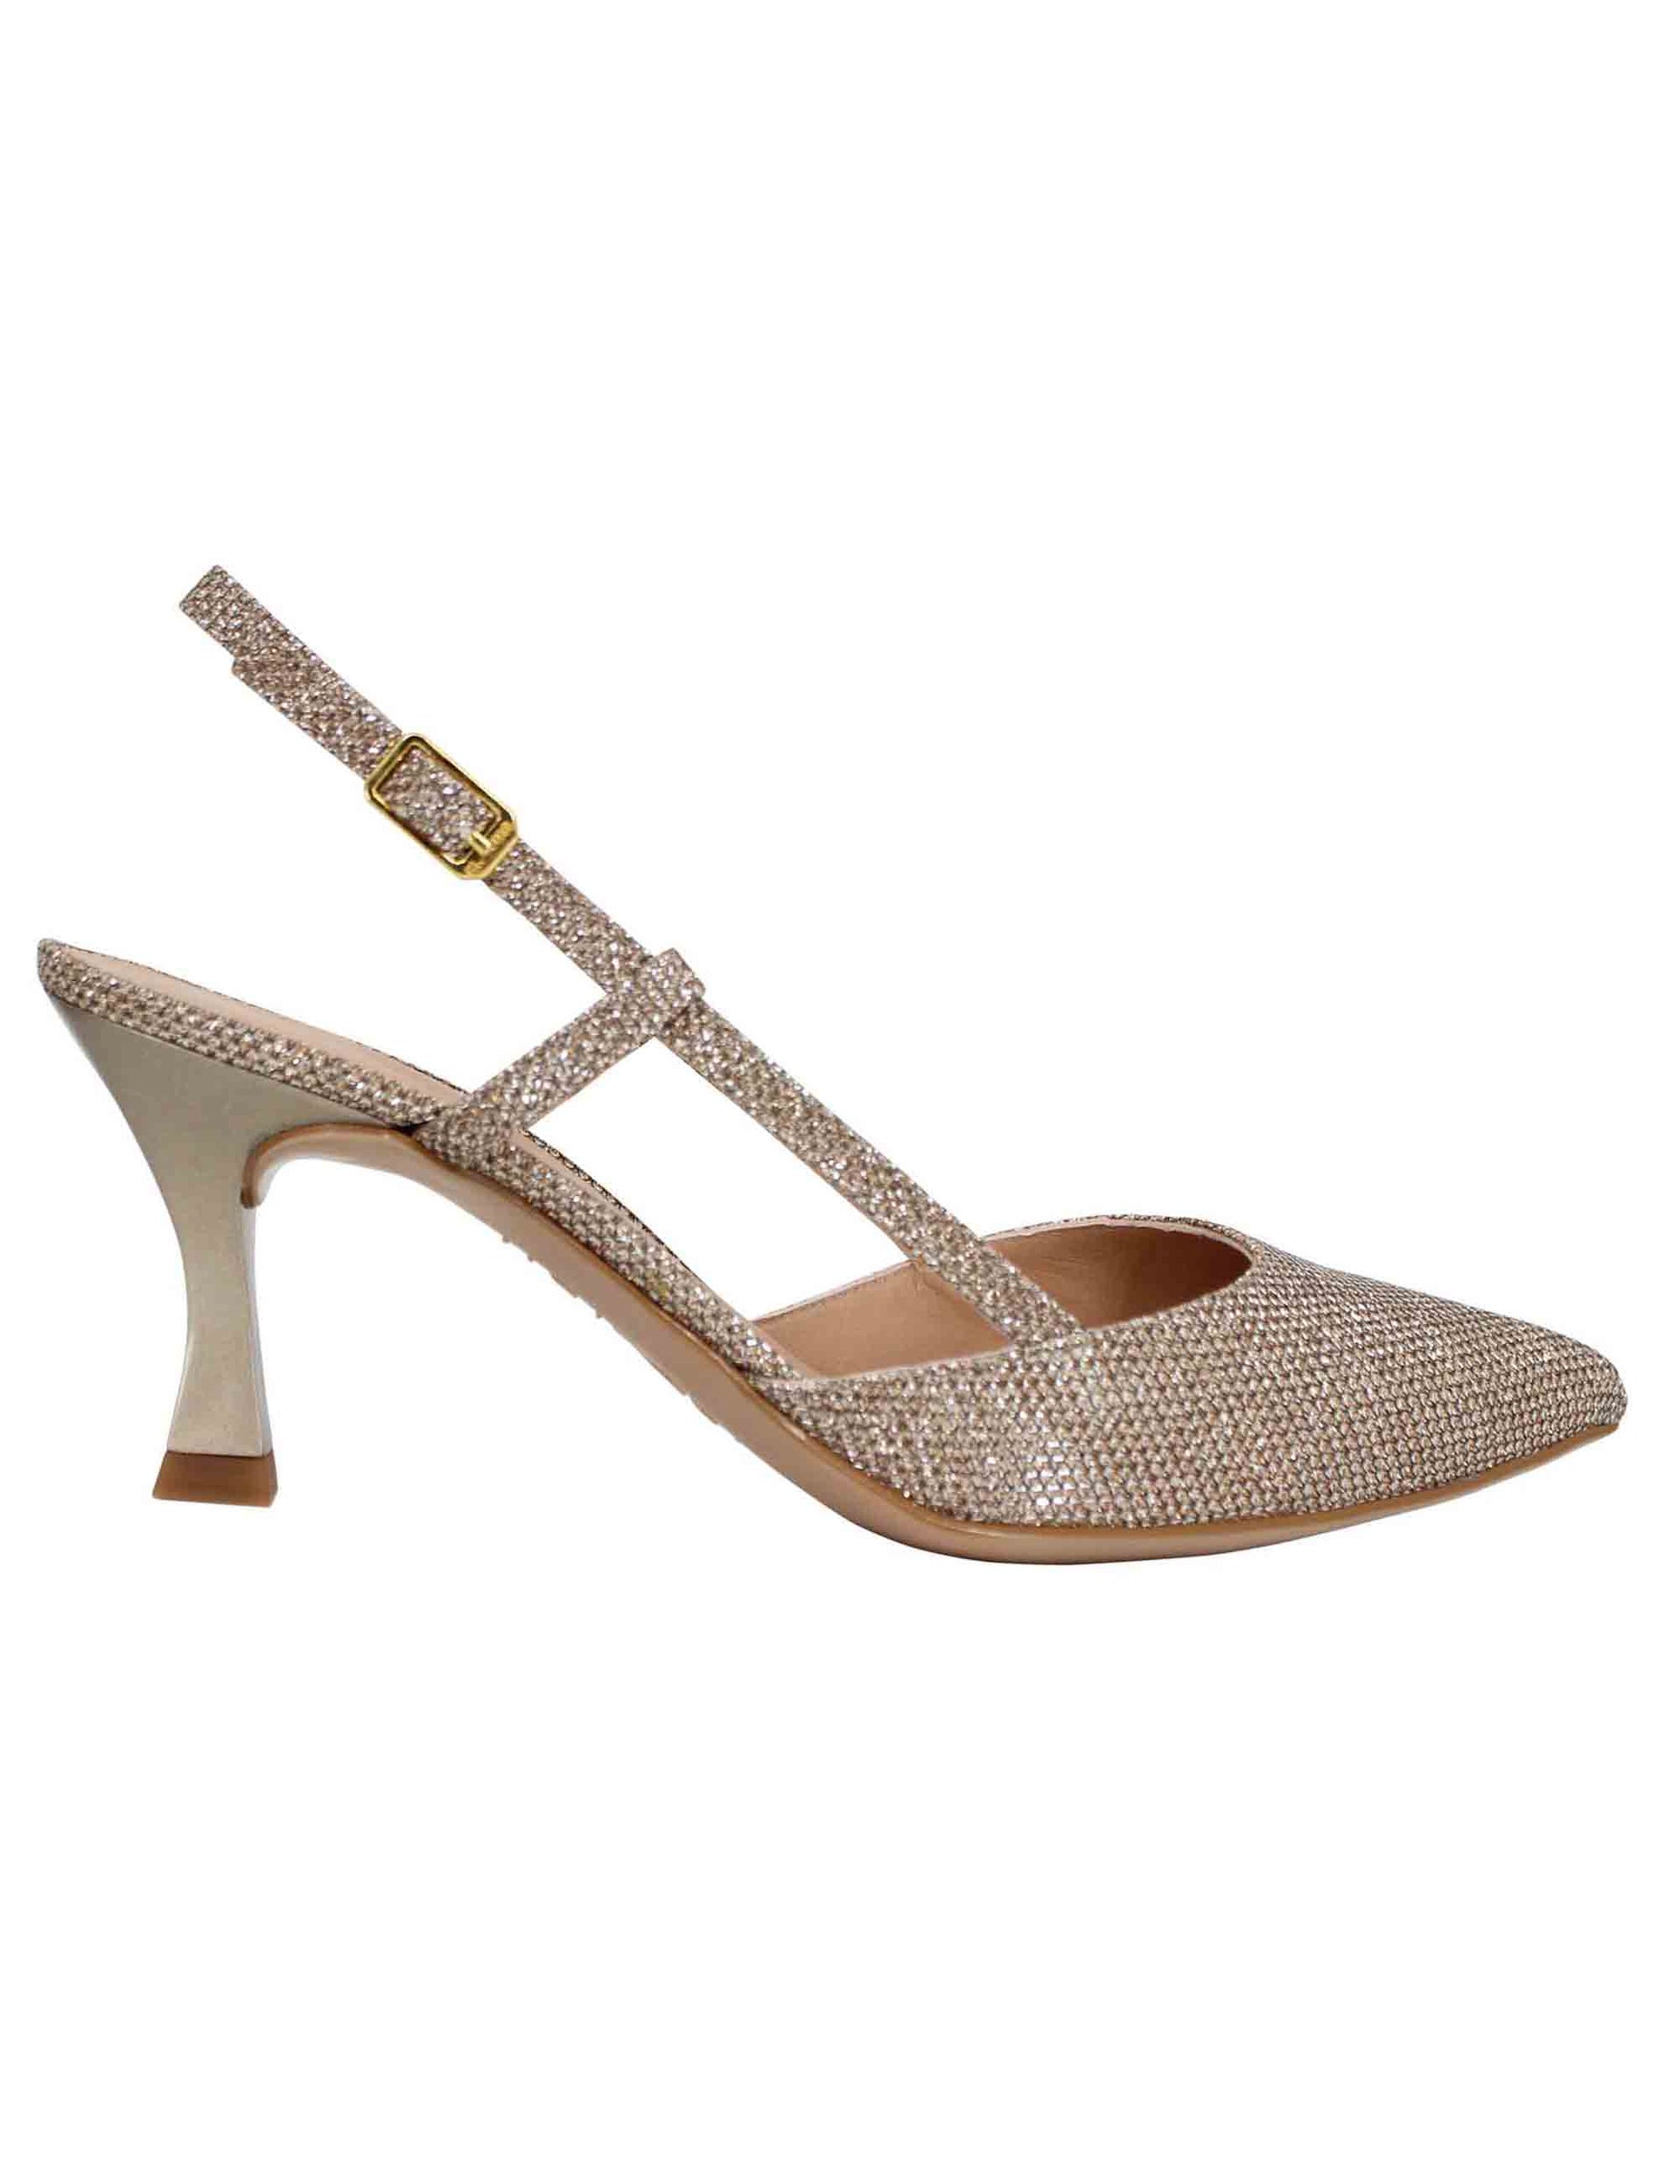 Women's slingback pumps in shiny bronze fabric with high heel